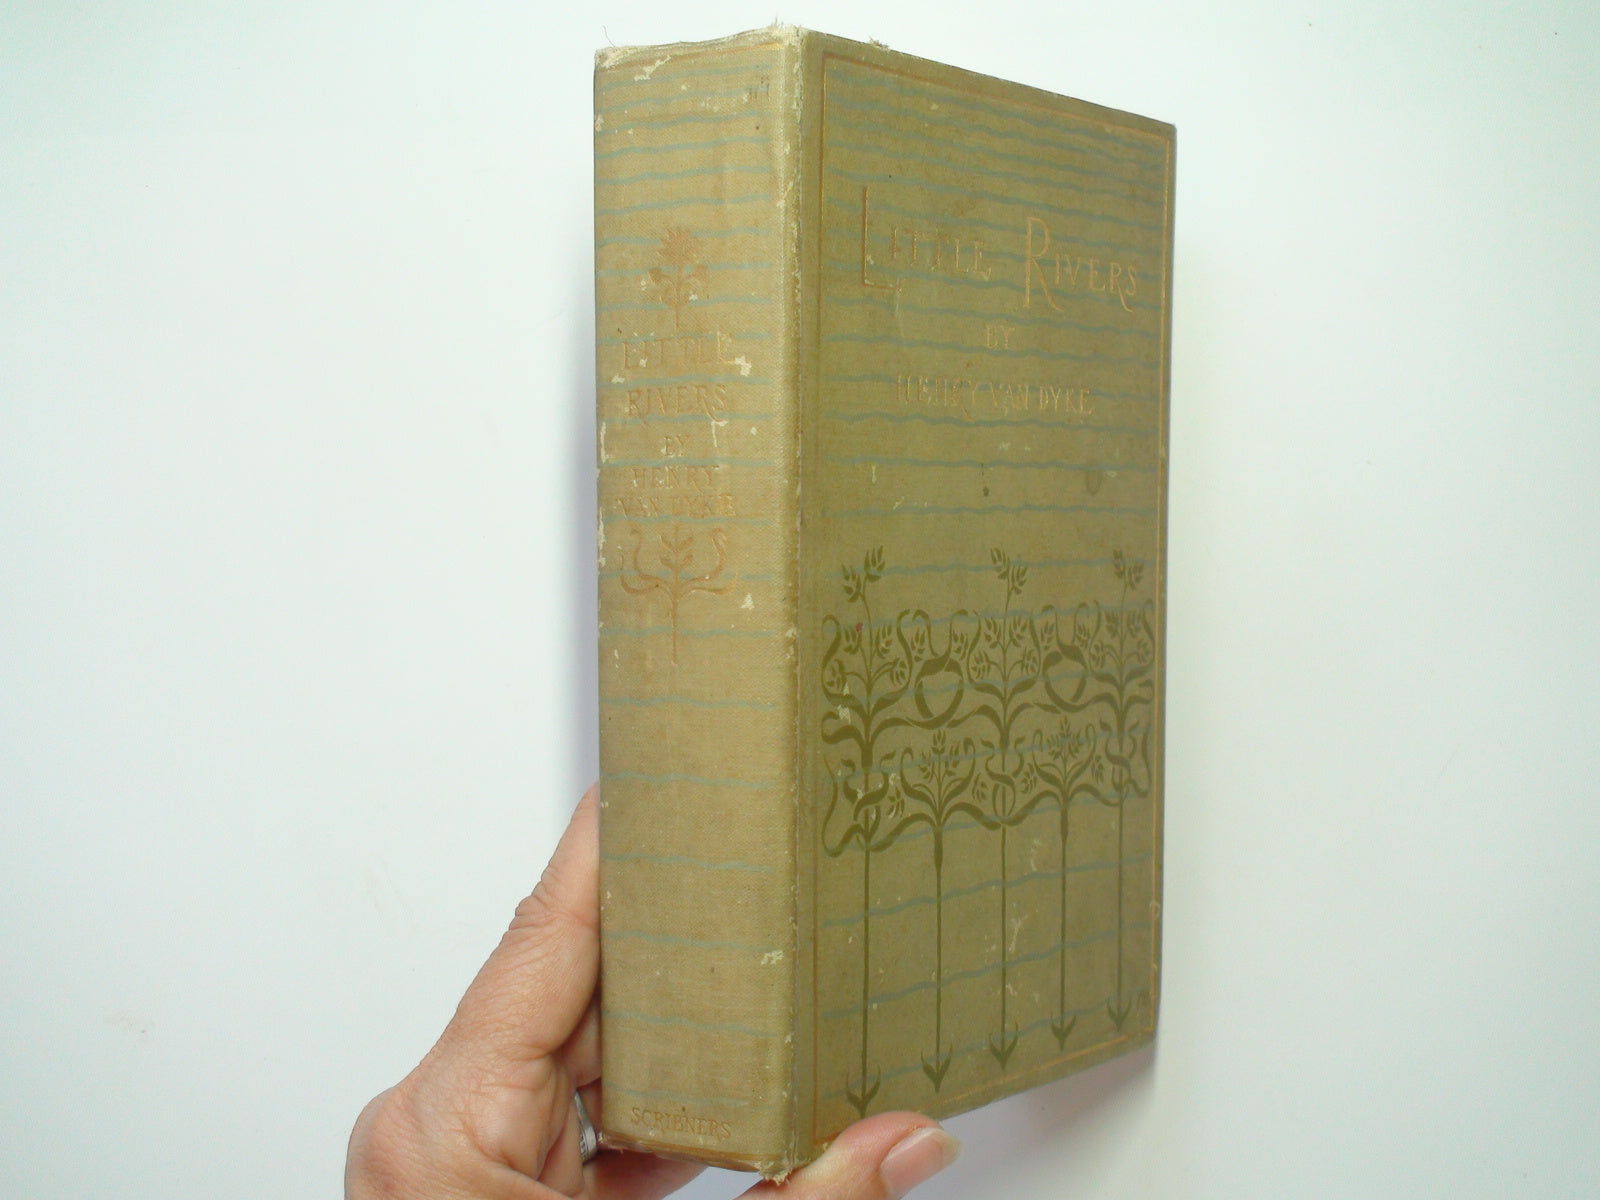 Little Rivers, Henry Van Dyke, Illustrated, Cameo Edition, 1902